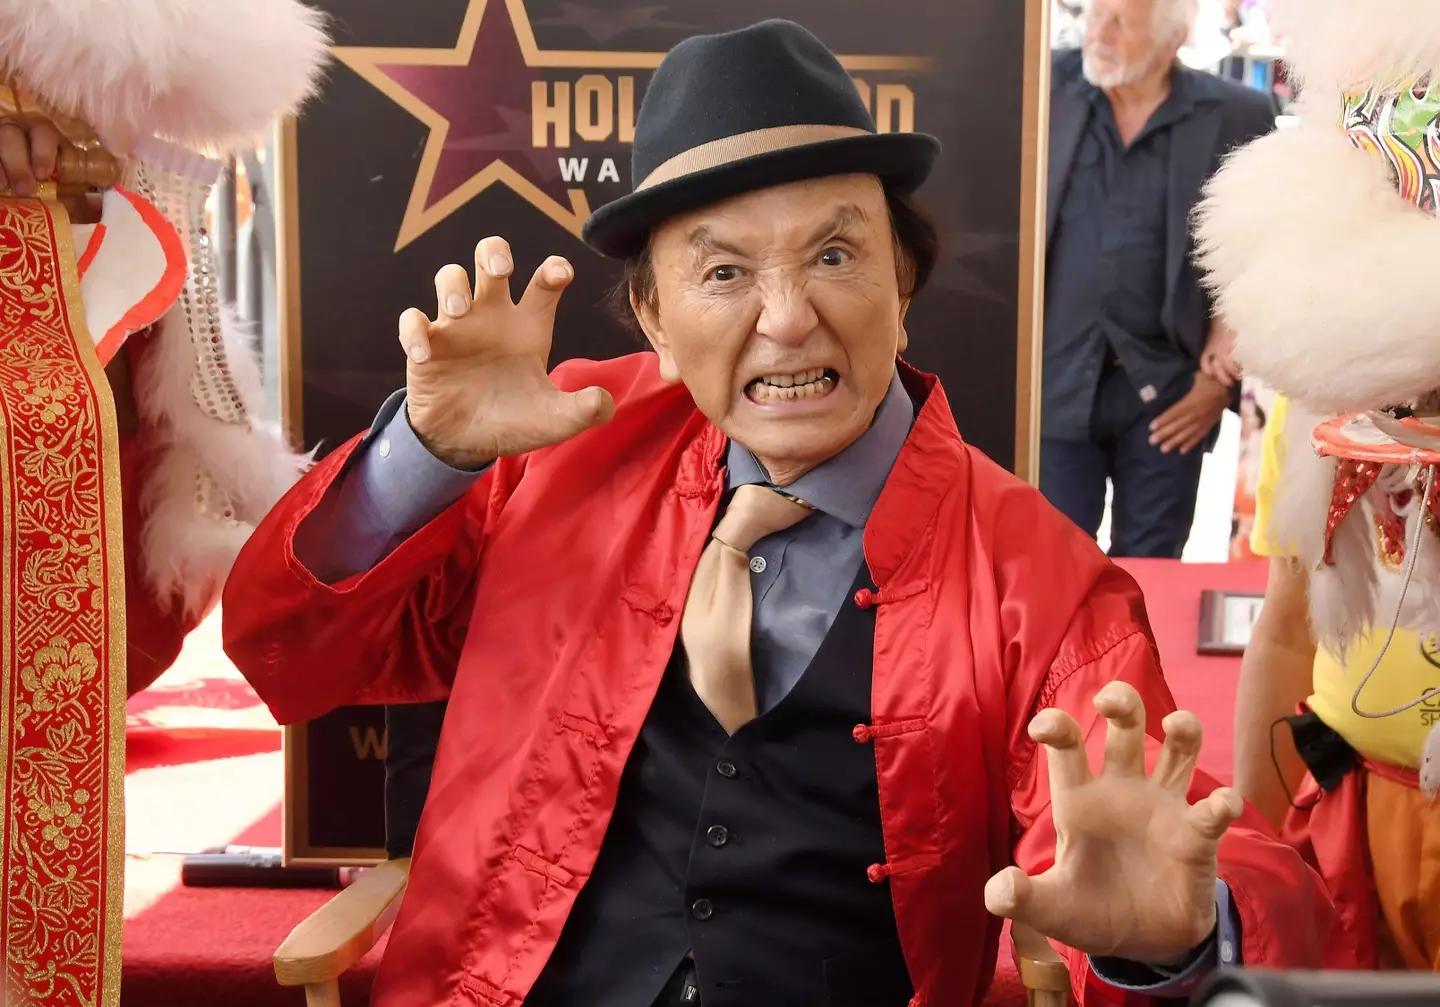 James Hong, looking incredible for his age.